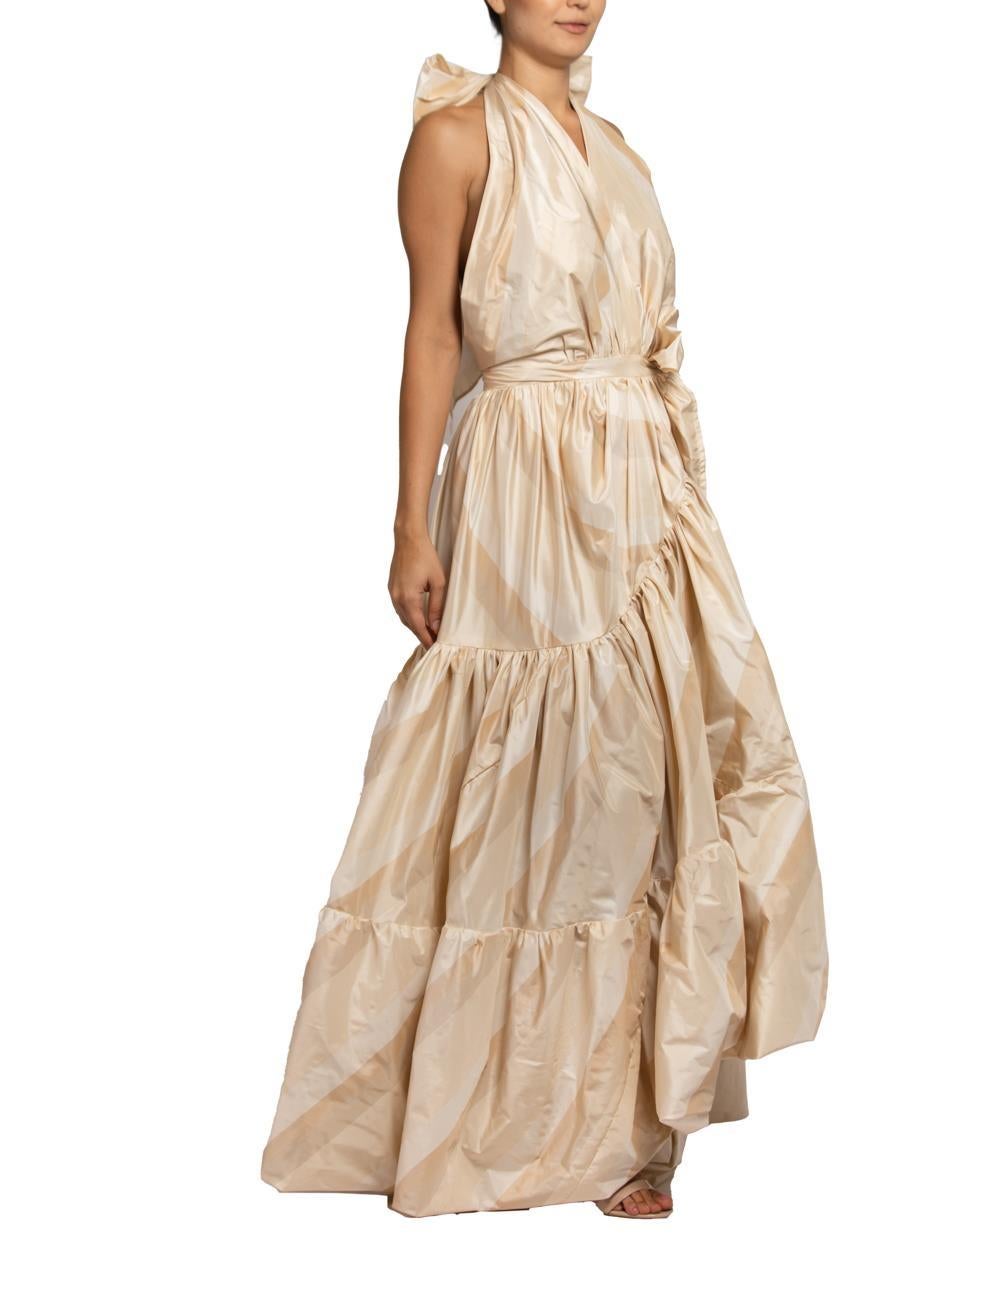 MORPHEW COLLECTION Cream & Ecru Silk Taffeta Plaid Gown In Excellent Condition For Sale In New York, NY